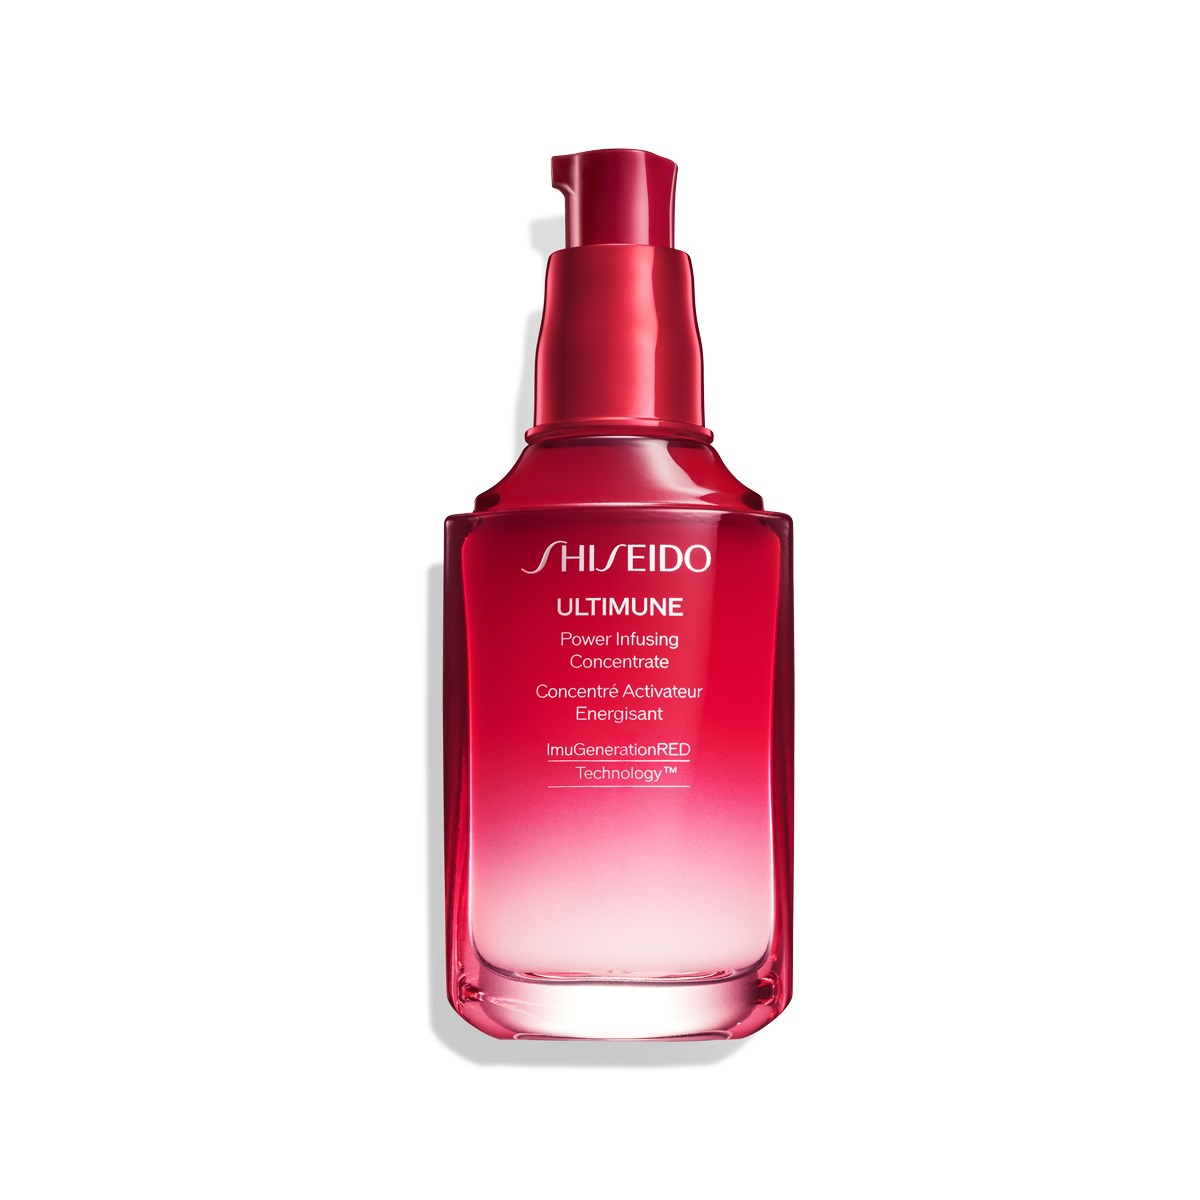 YENİ ULTIMUNE POWER INFUSING CONCENTRATE - 50ML 3